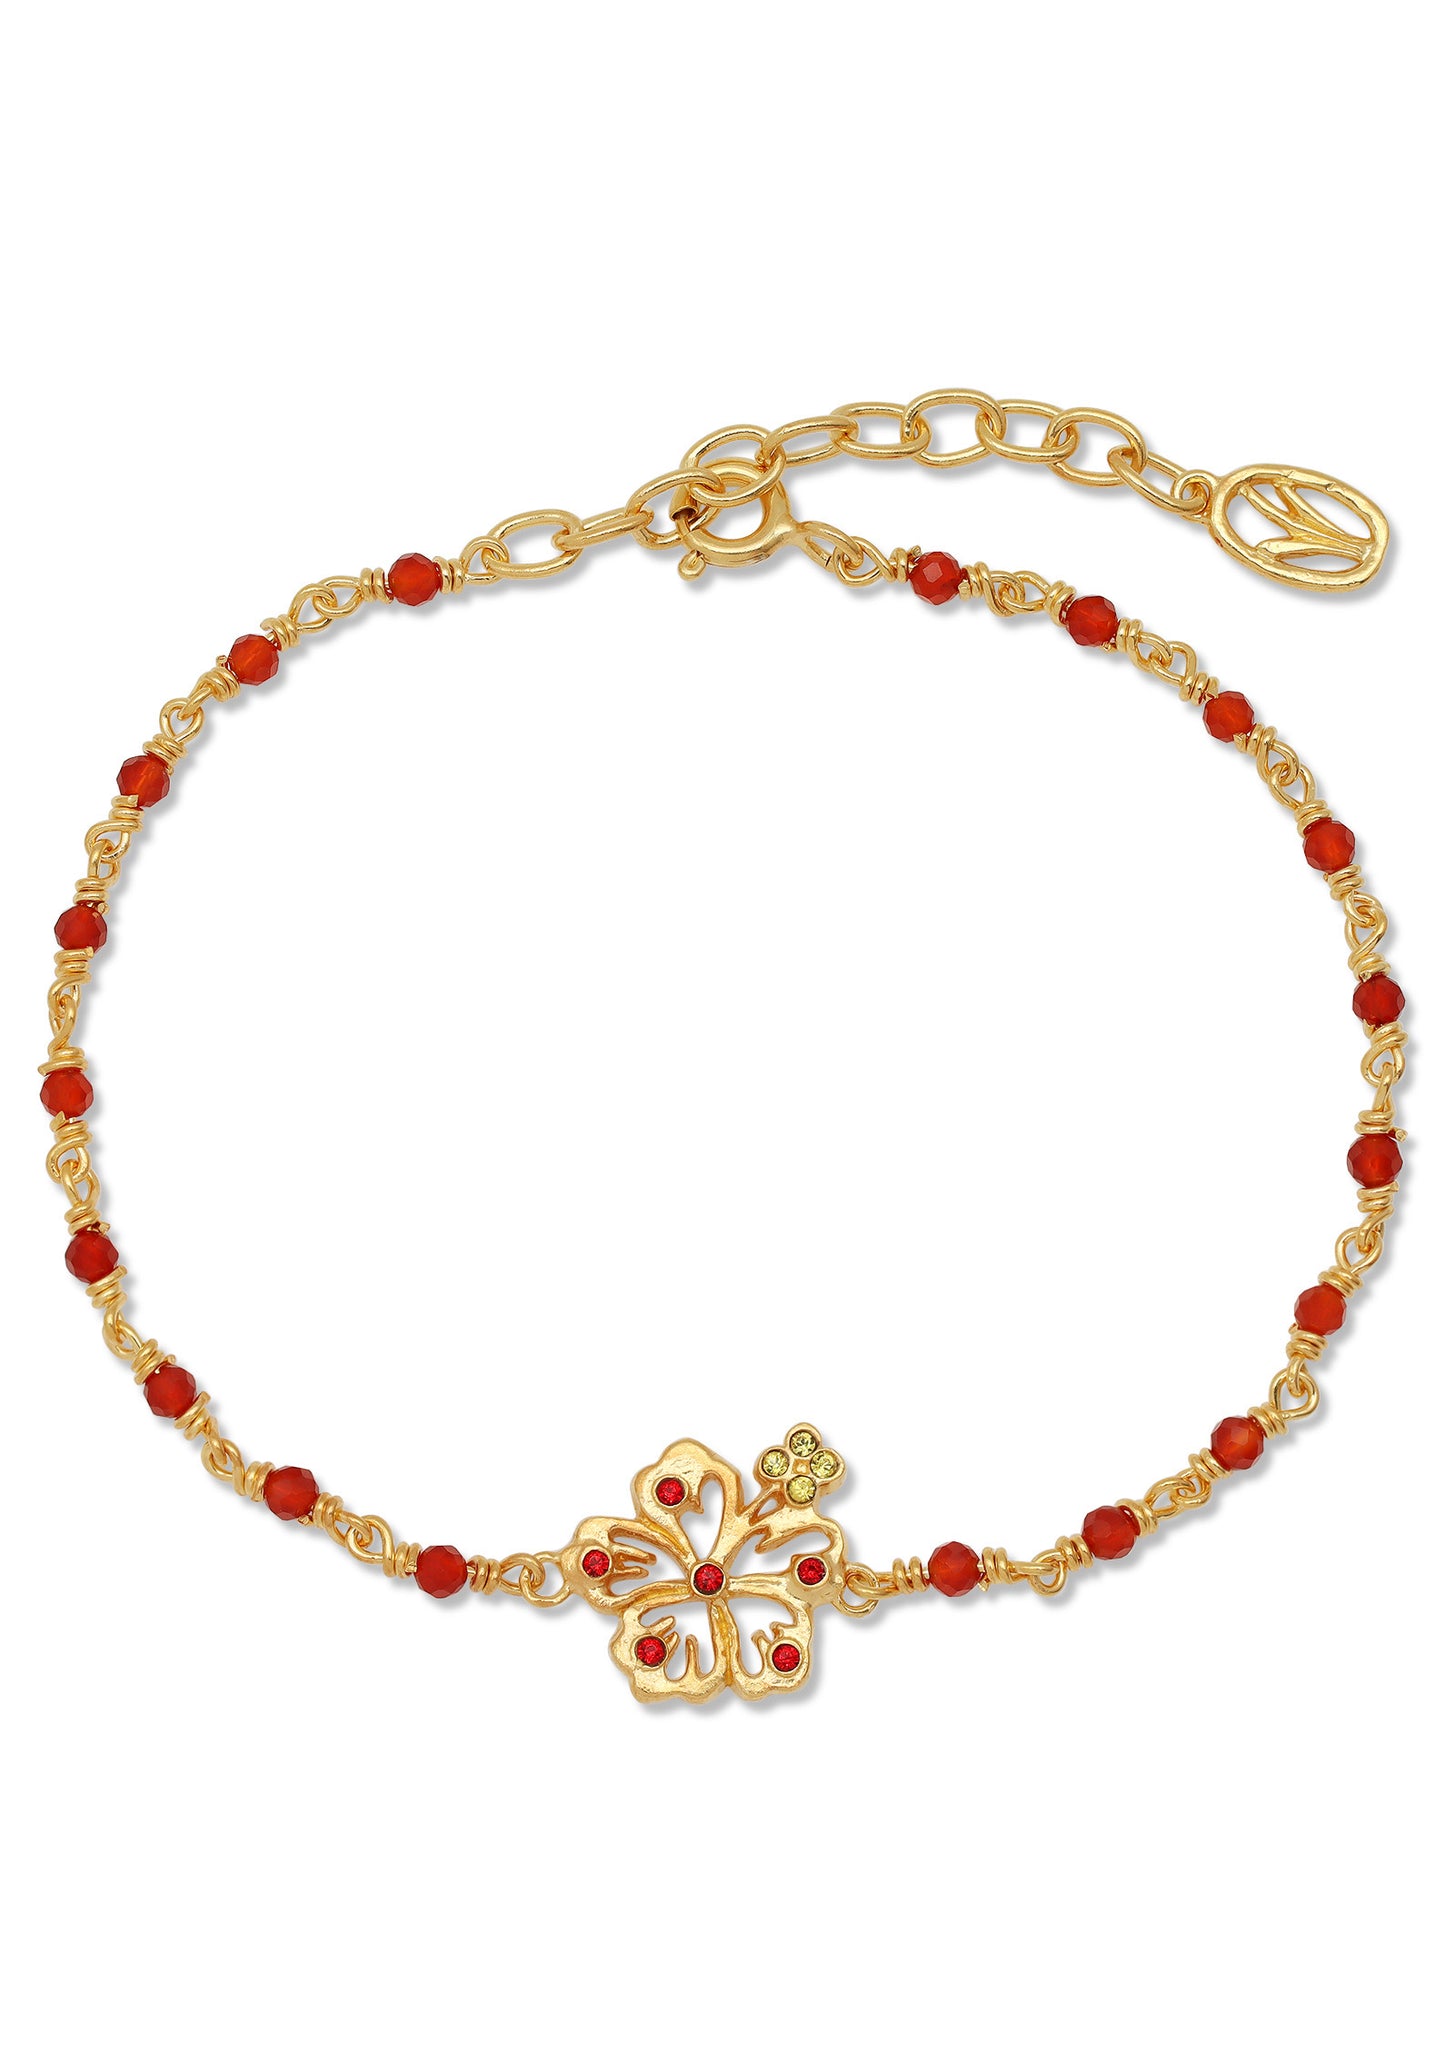 Hibiscus Red Crystal and Bead Bracelet